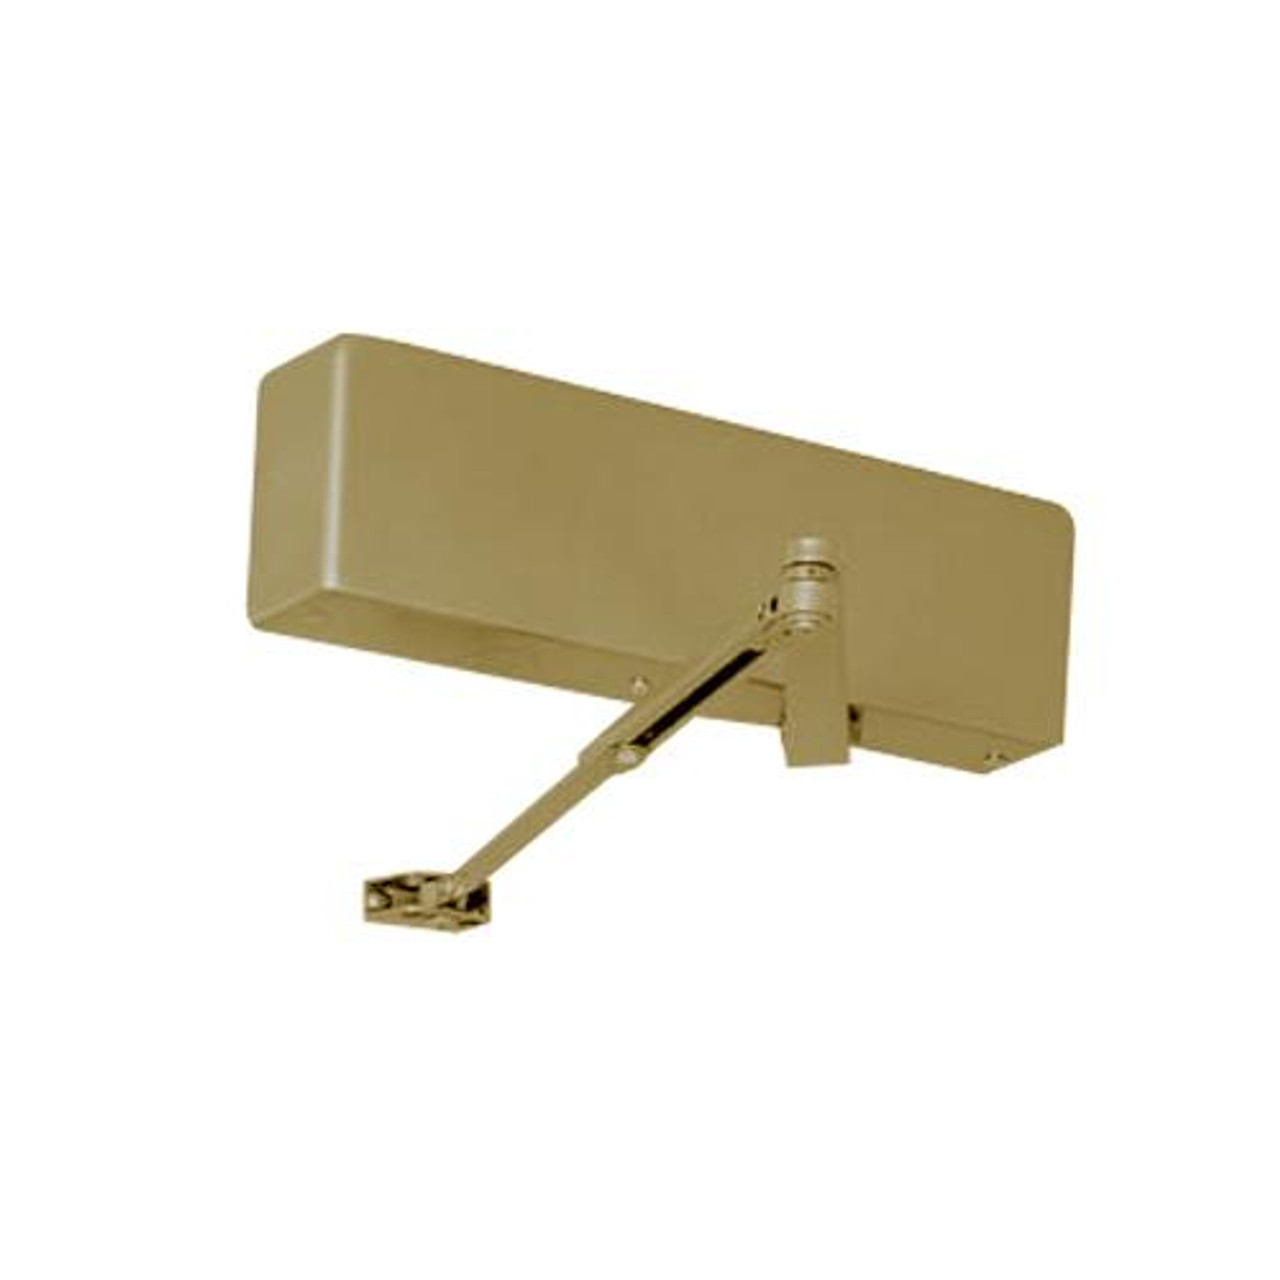 TJ4400-696 Yale 4400 Series Institutional Door Closer with Top Jamb Only Reveals 2-3/4" to 7" in Satin Brass